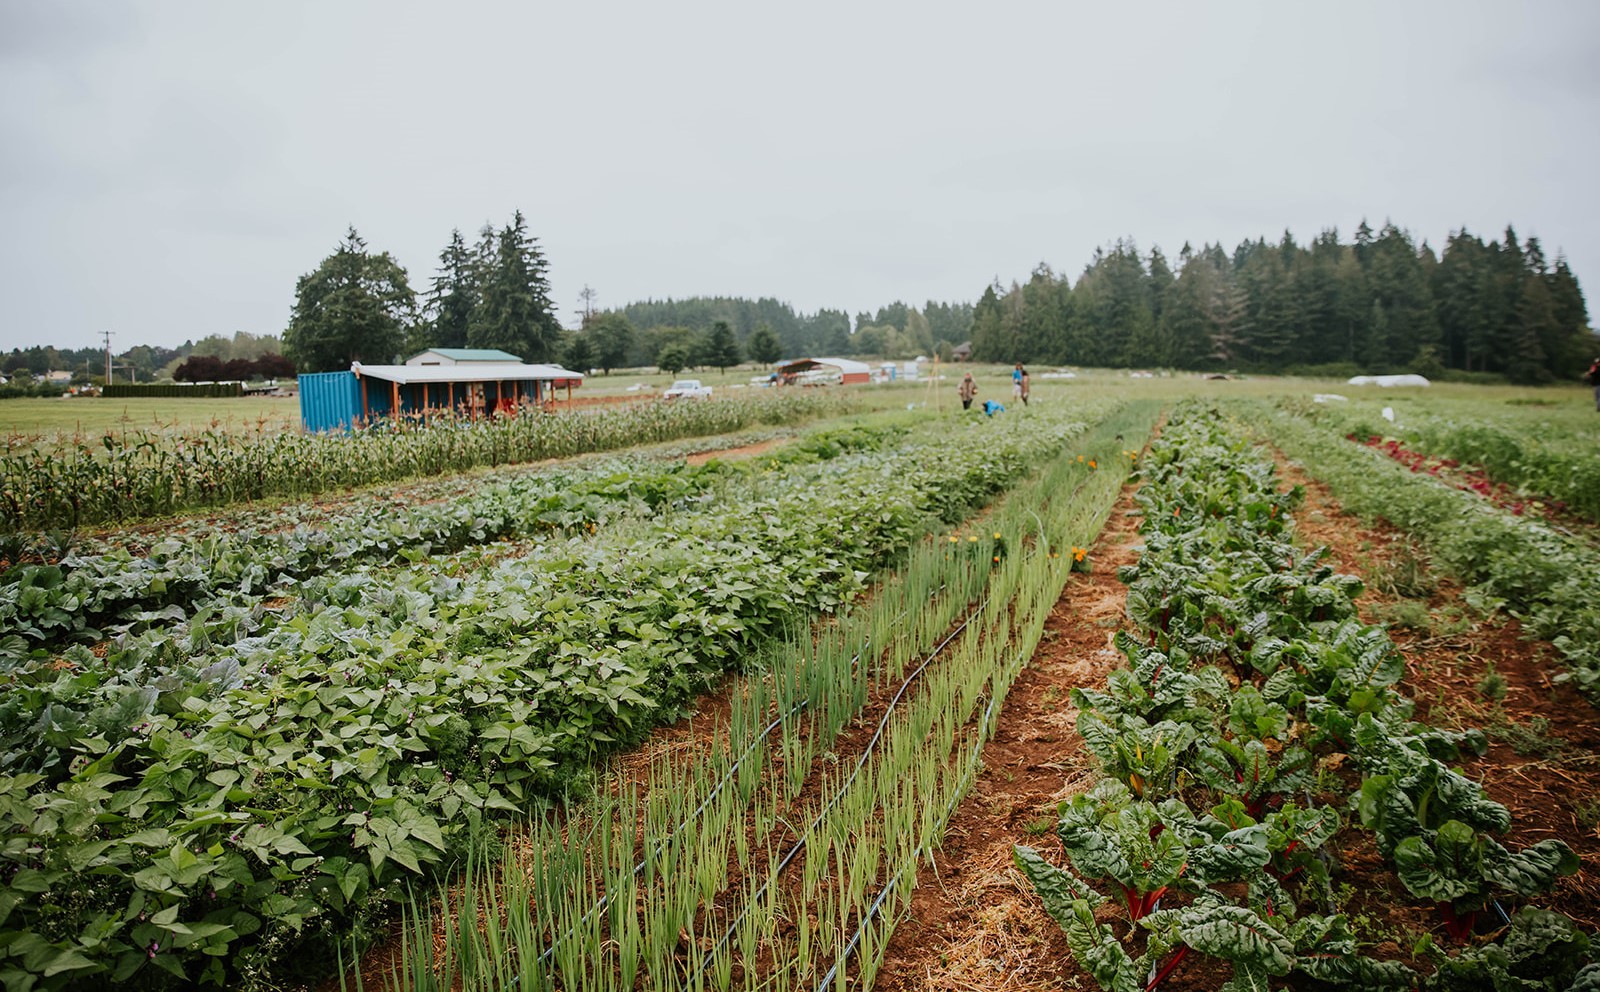 A farm field with long rows of thriving vegetables under a grey sky.